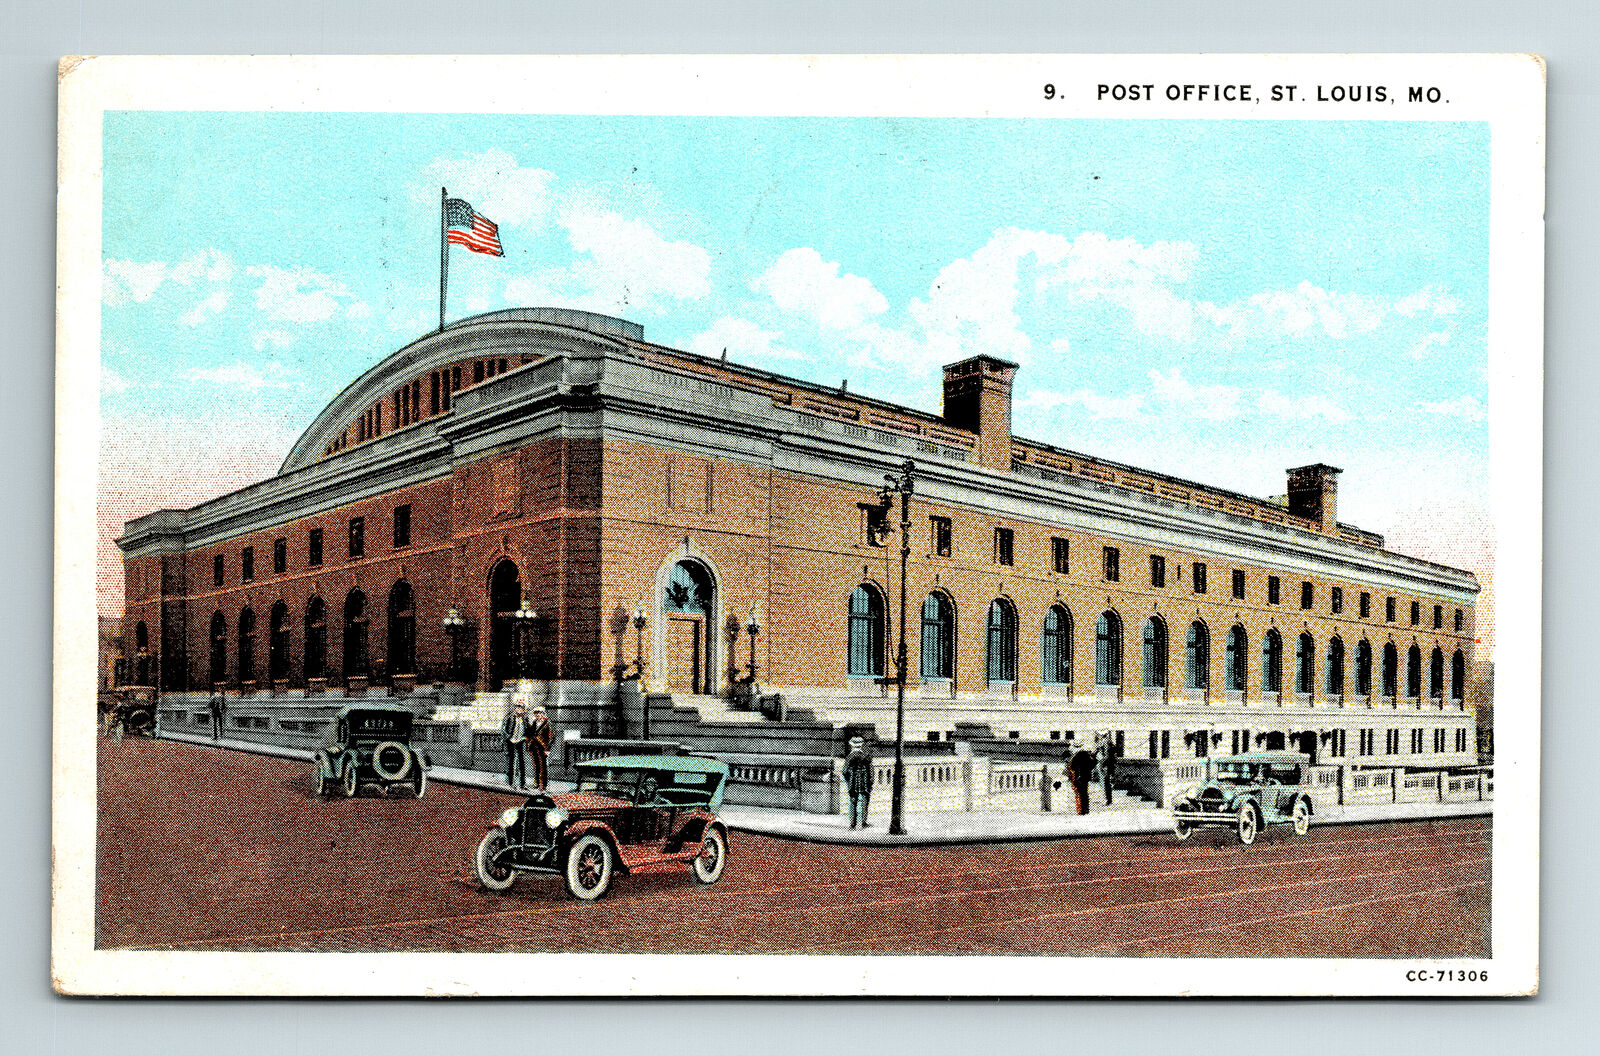 c1927 WB Postcard St. Louis MO Post Office Old Cars